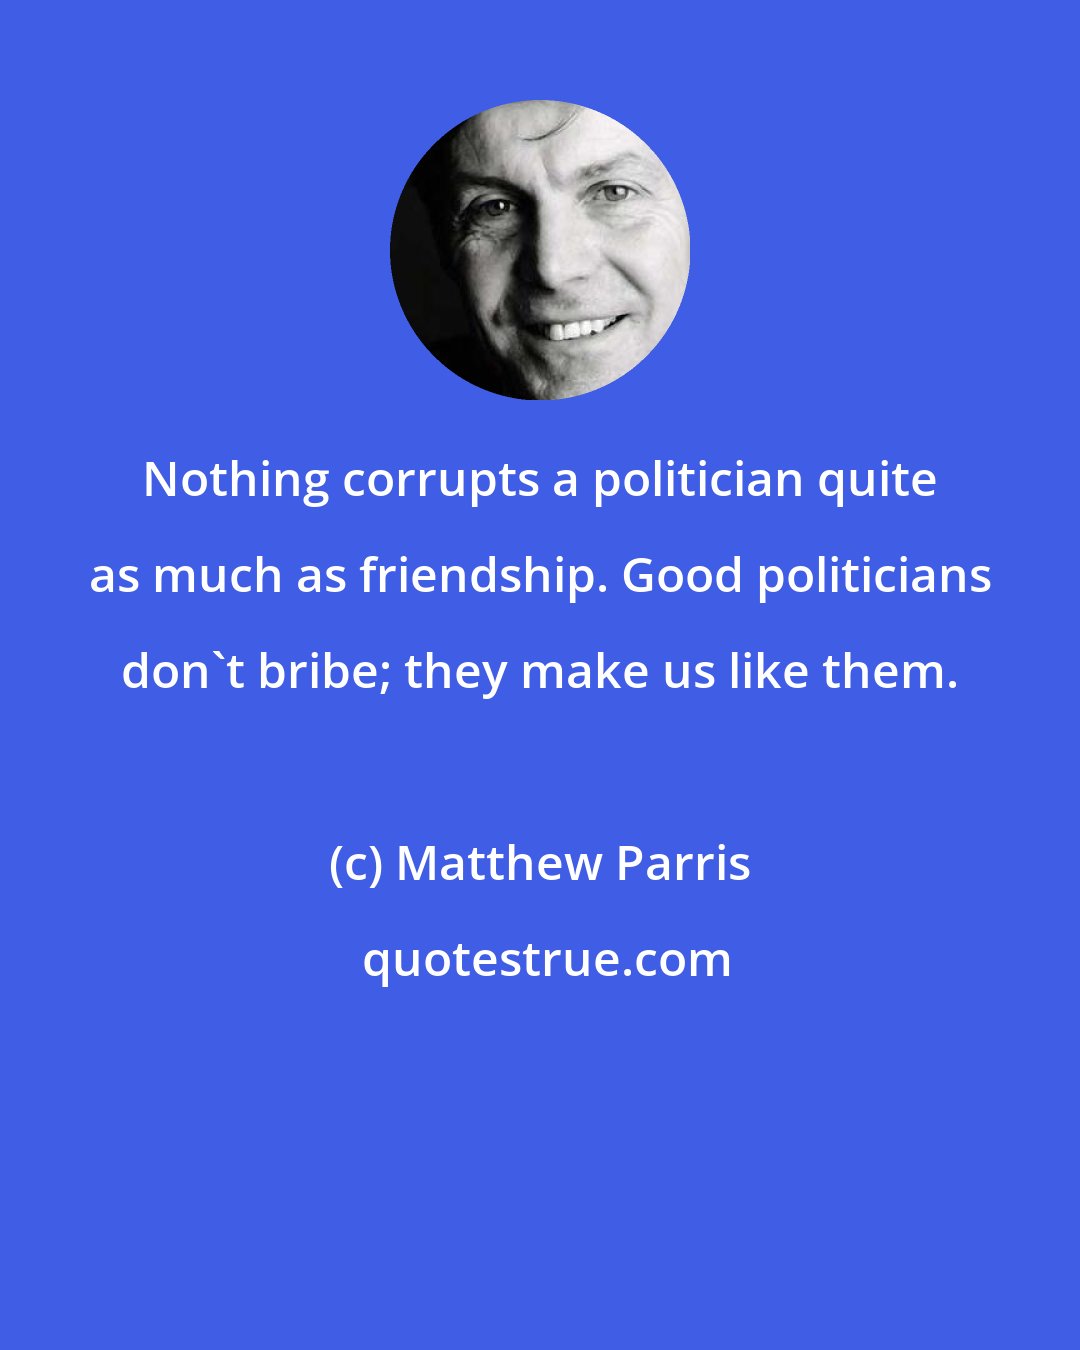 Matthew Parris: Nothing corrupts a politician quite as much as friendship. Good politicians don't bribe; they make us like them.